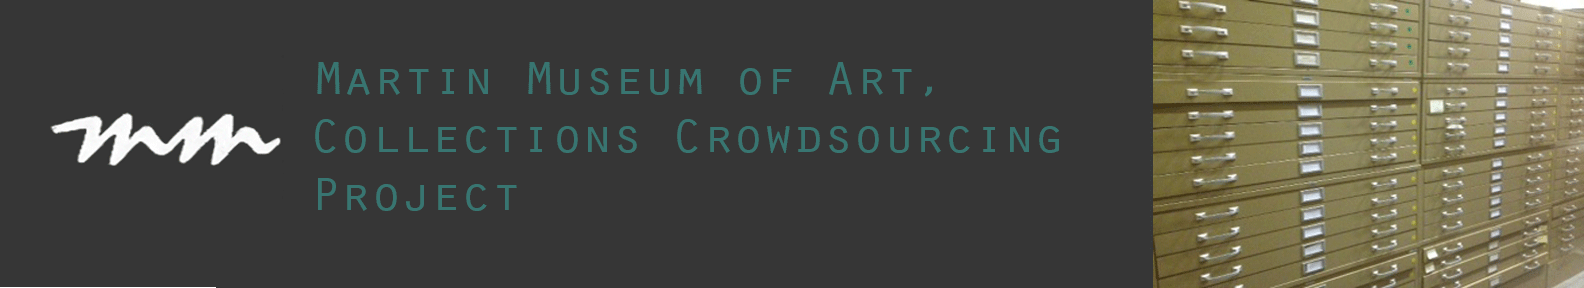 Martin Museum of Art, Collections Crowdsourcing Project